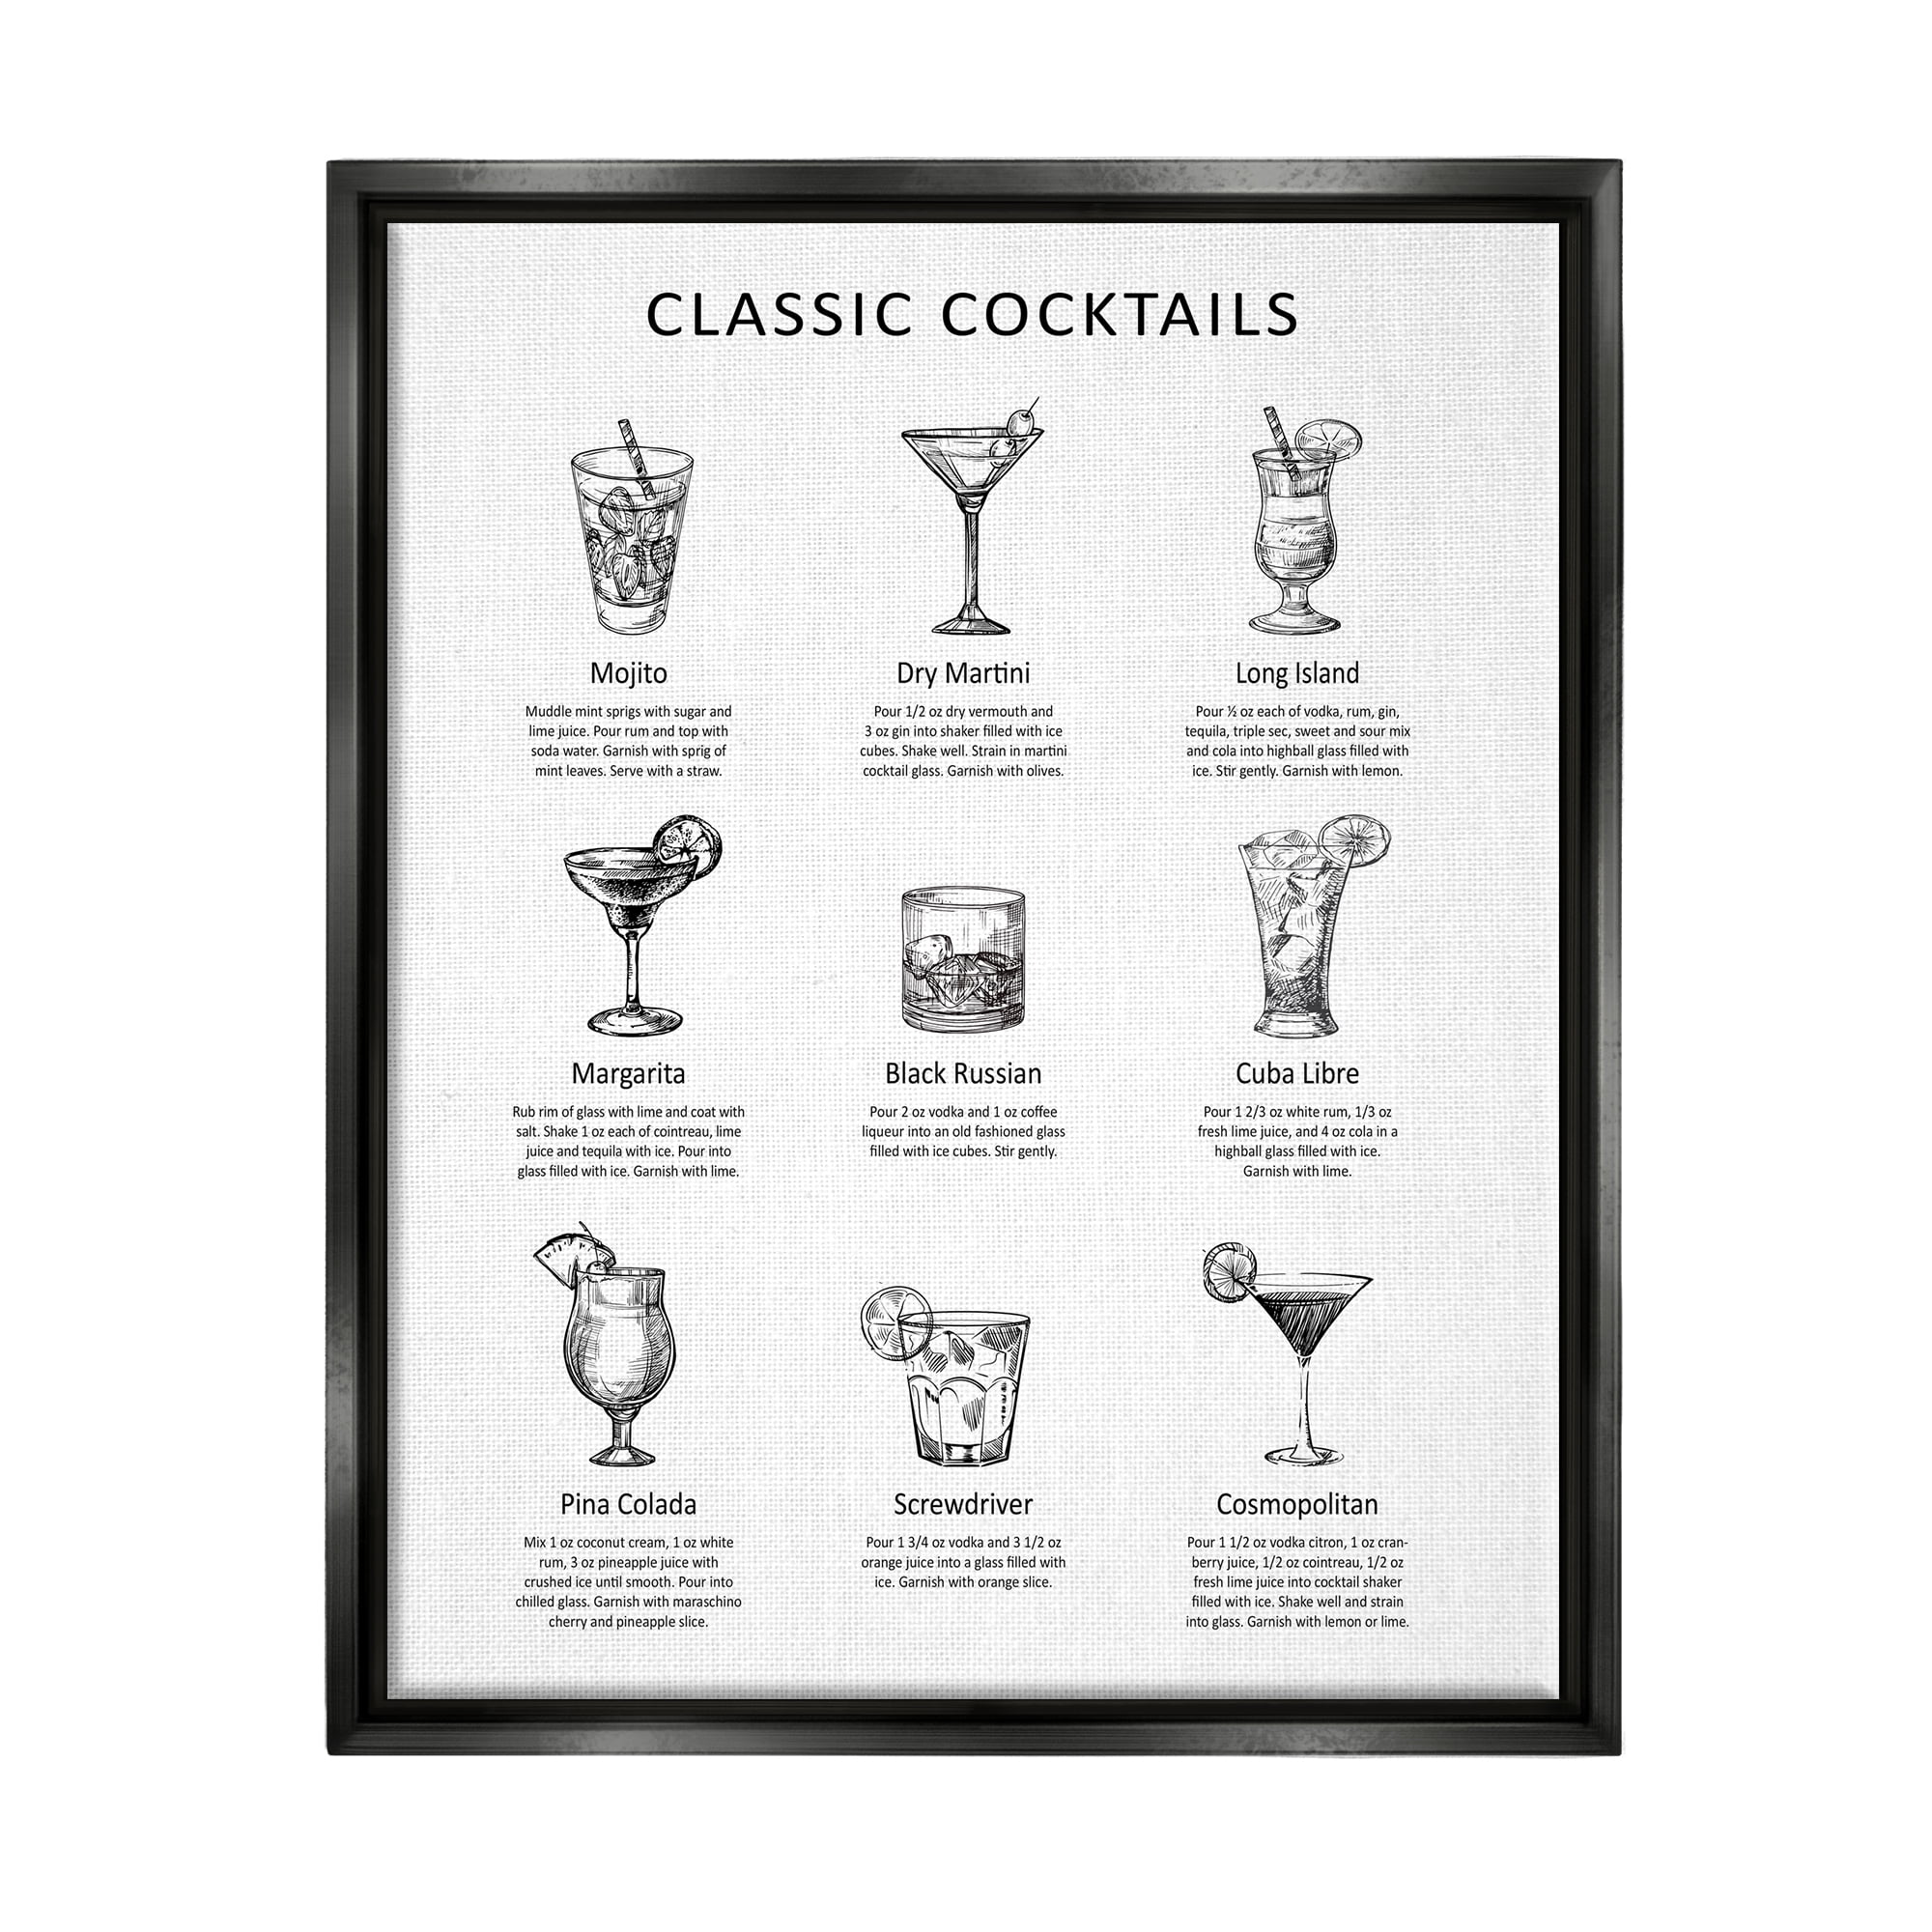 Vodka Shots, Cheers Print, Black and White, Cocktail Wall Ar